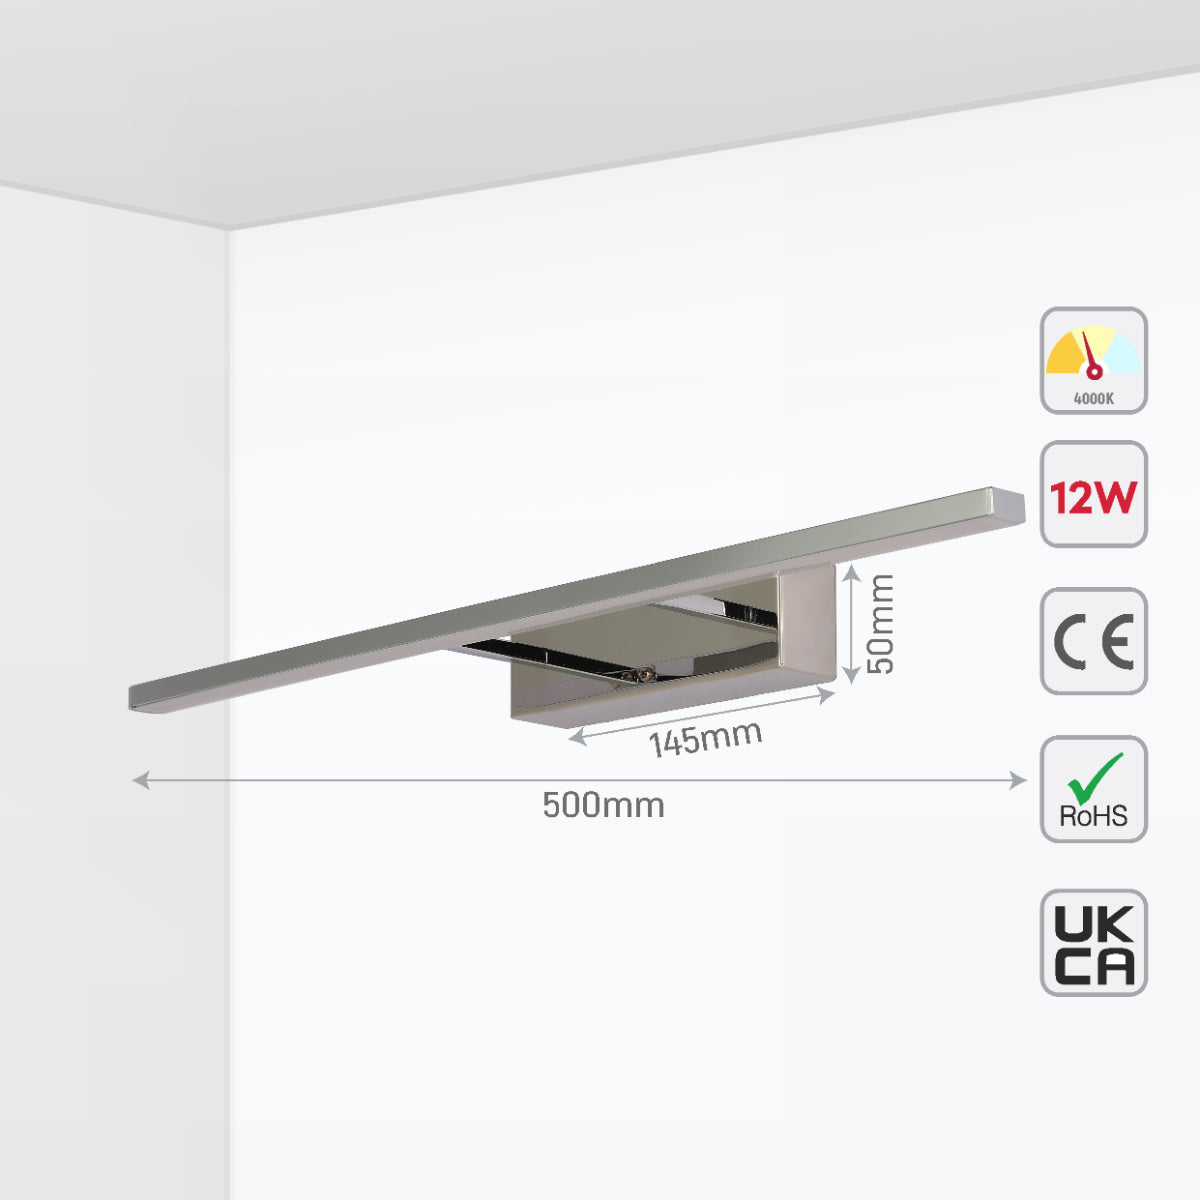 Size and certifications of Contemporary LED Light for Picture Frames & Bathroom Sanity Mirrors - 50cm 117-032698